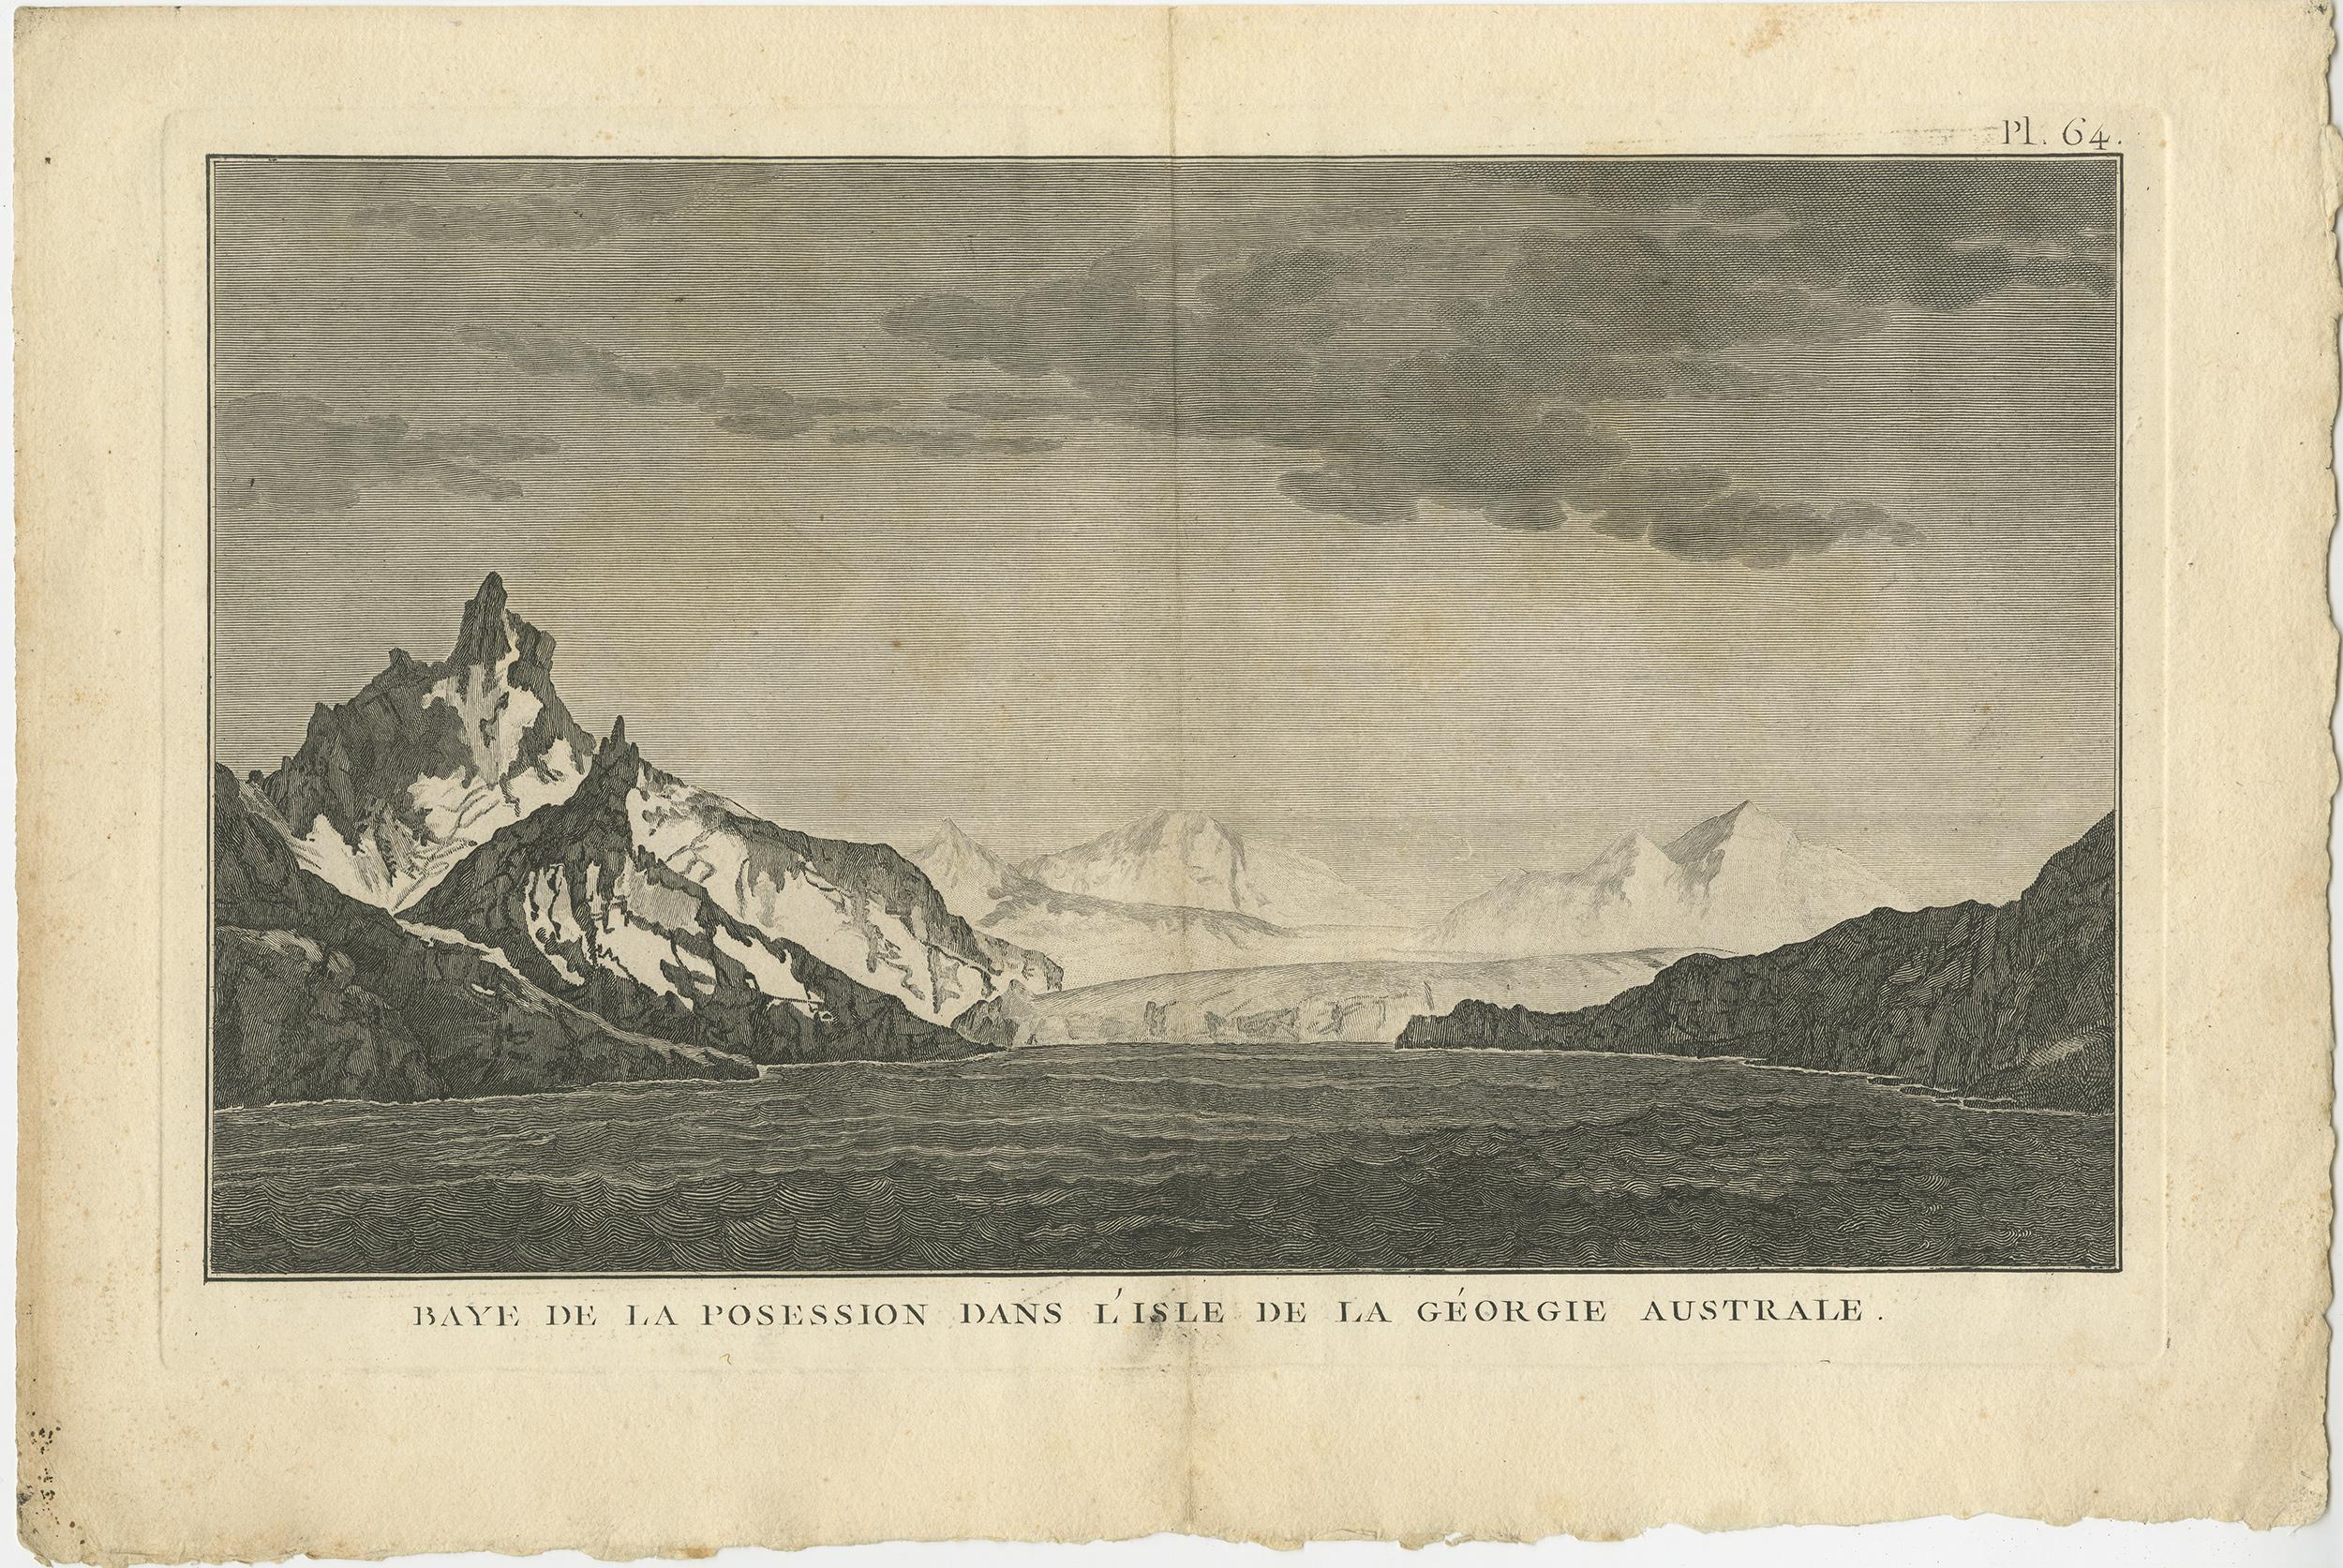 Antique print titled 'Baye de la Posession dans l'Isle de la Géorgie Australe'. View of Possession Bay, on the north coast of South Georgia, an island in the southern Atlantic Ocean. Captain James Cook circumnavigated the island in 1775 and made the